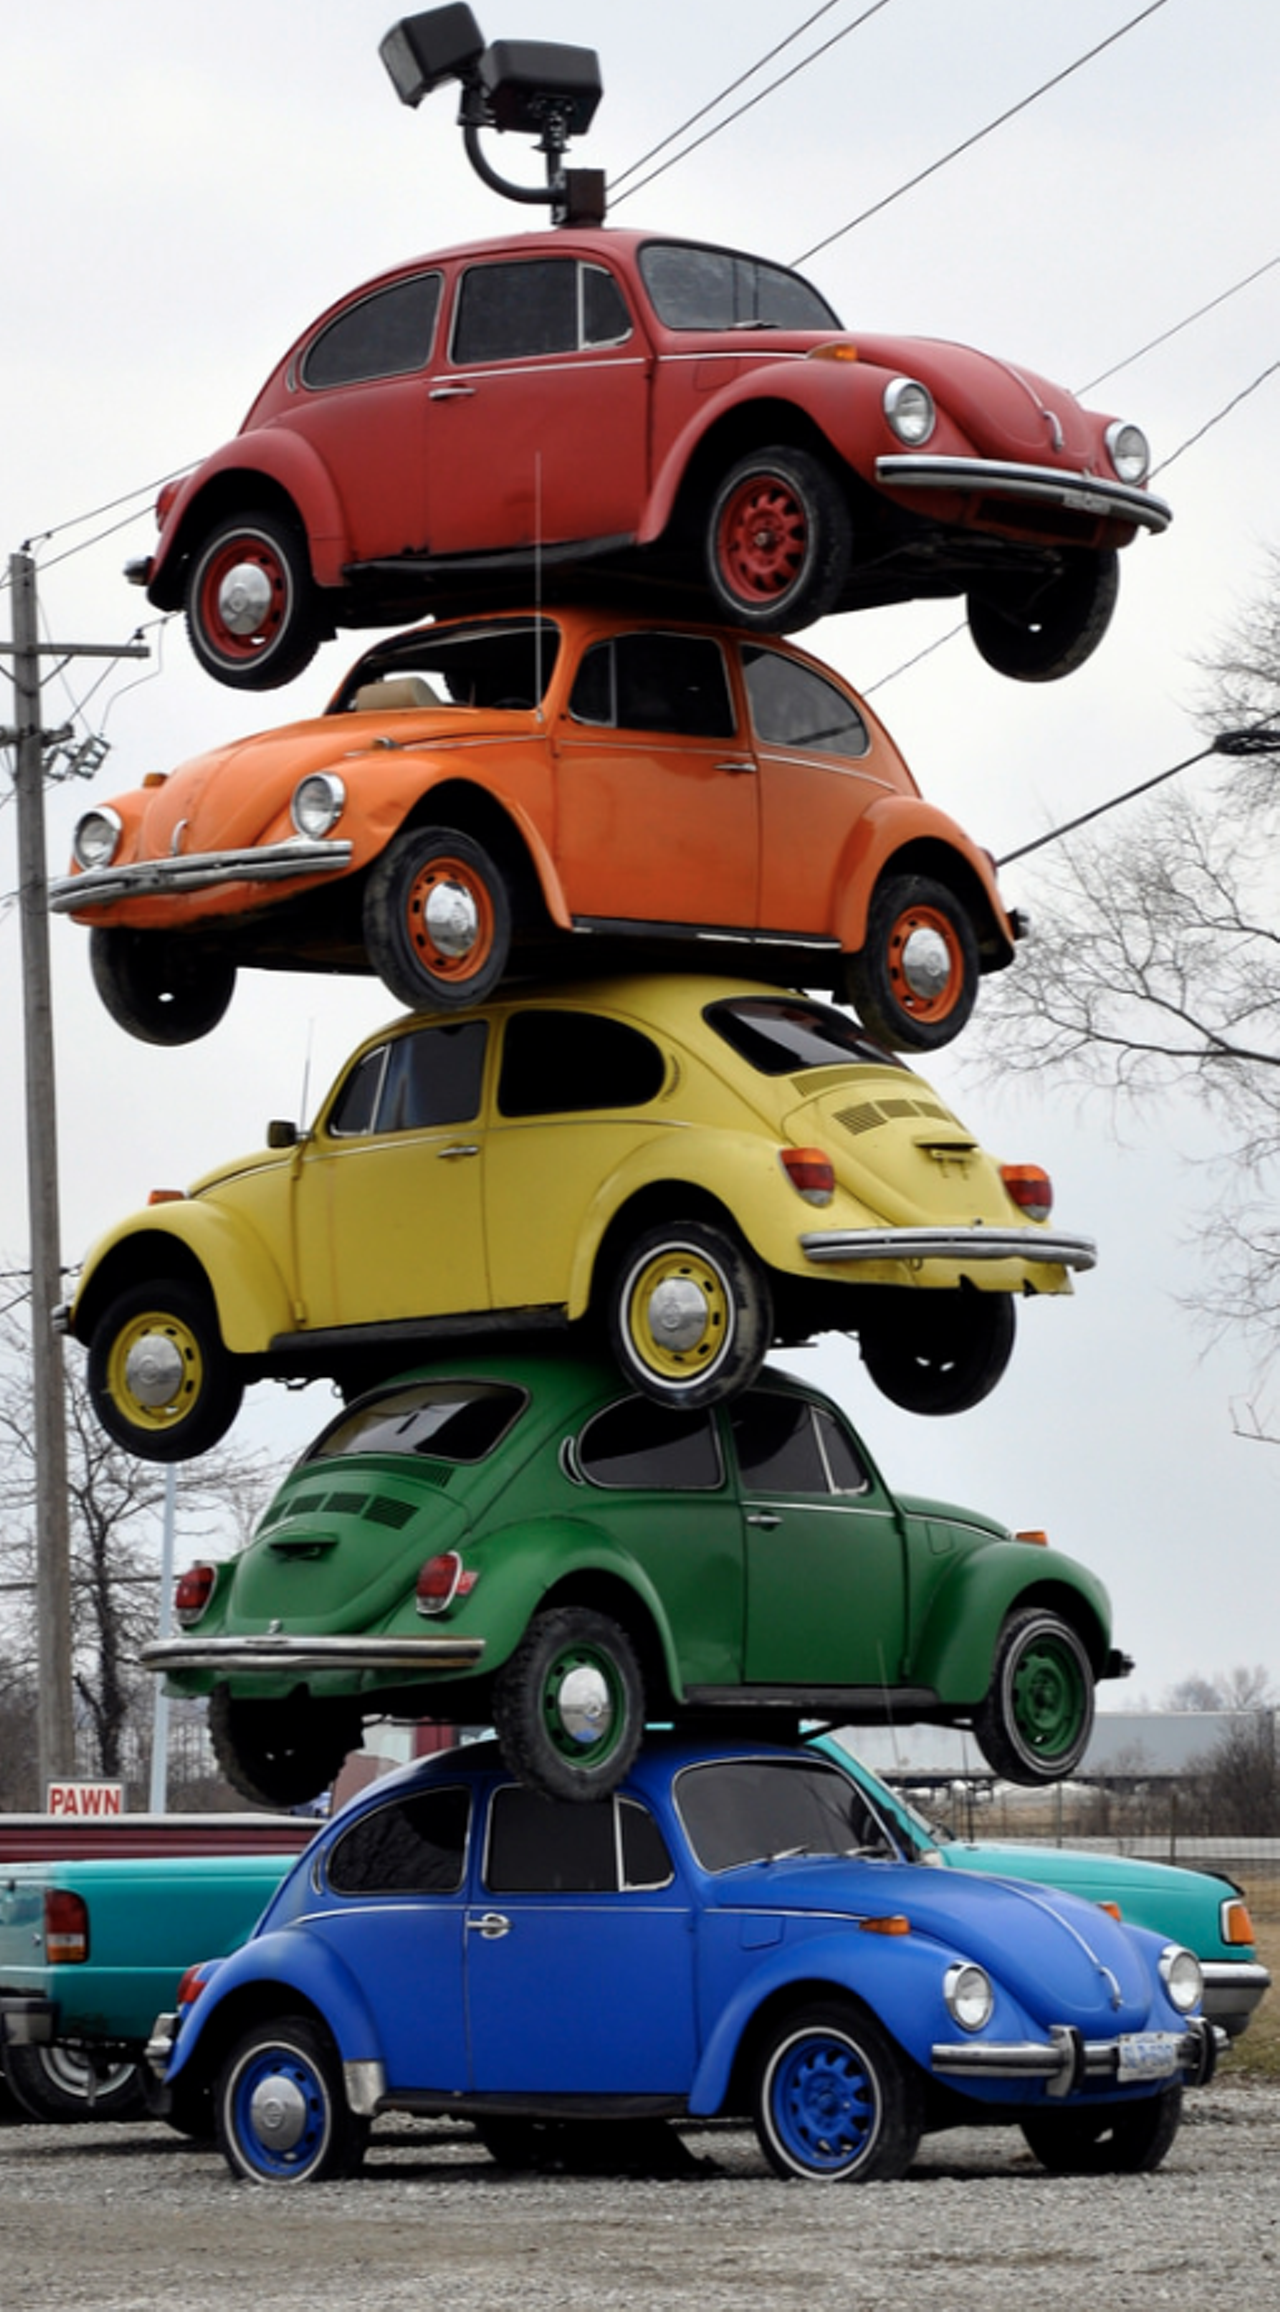  Tower of VW Bugs
1938 East Second St., Defiance 
Head west on 80 for about two and a half hours to see this stack of 1960’s Volkswagen Beetles. Five bugs are stacked on top of each other in the parking lot of Pack Rat’s Pawn Shop.